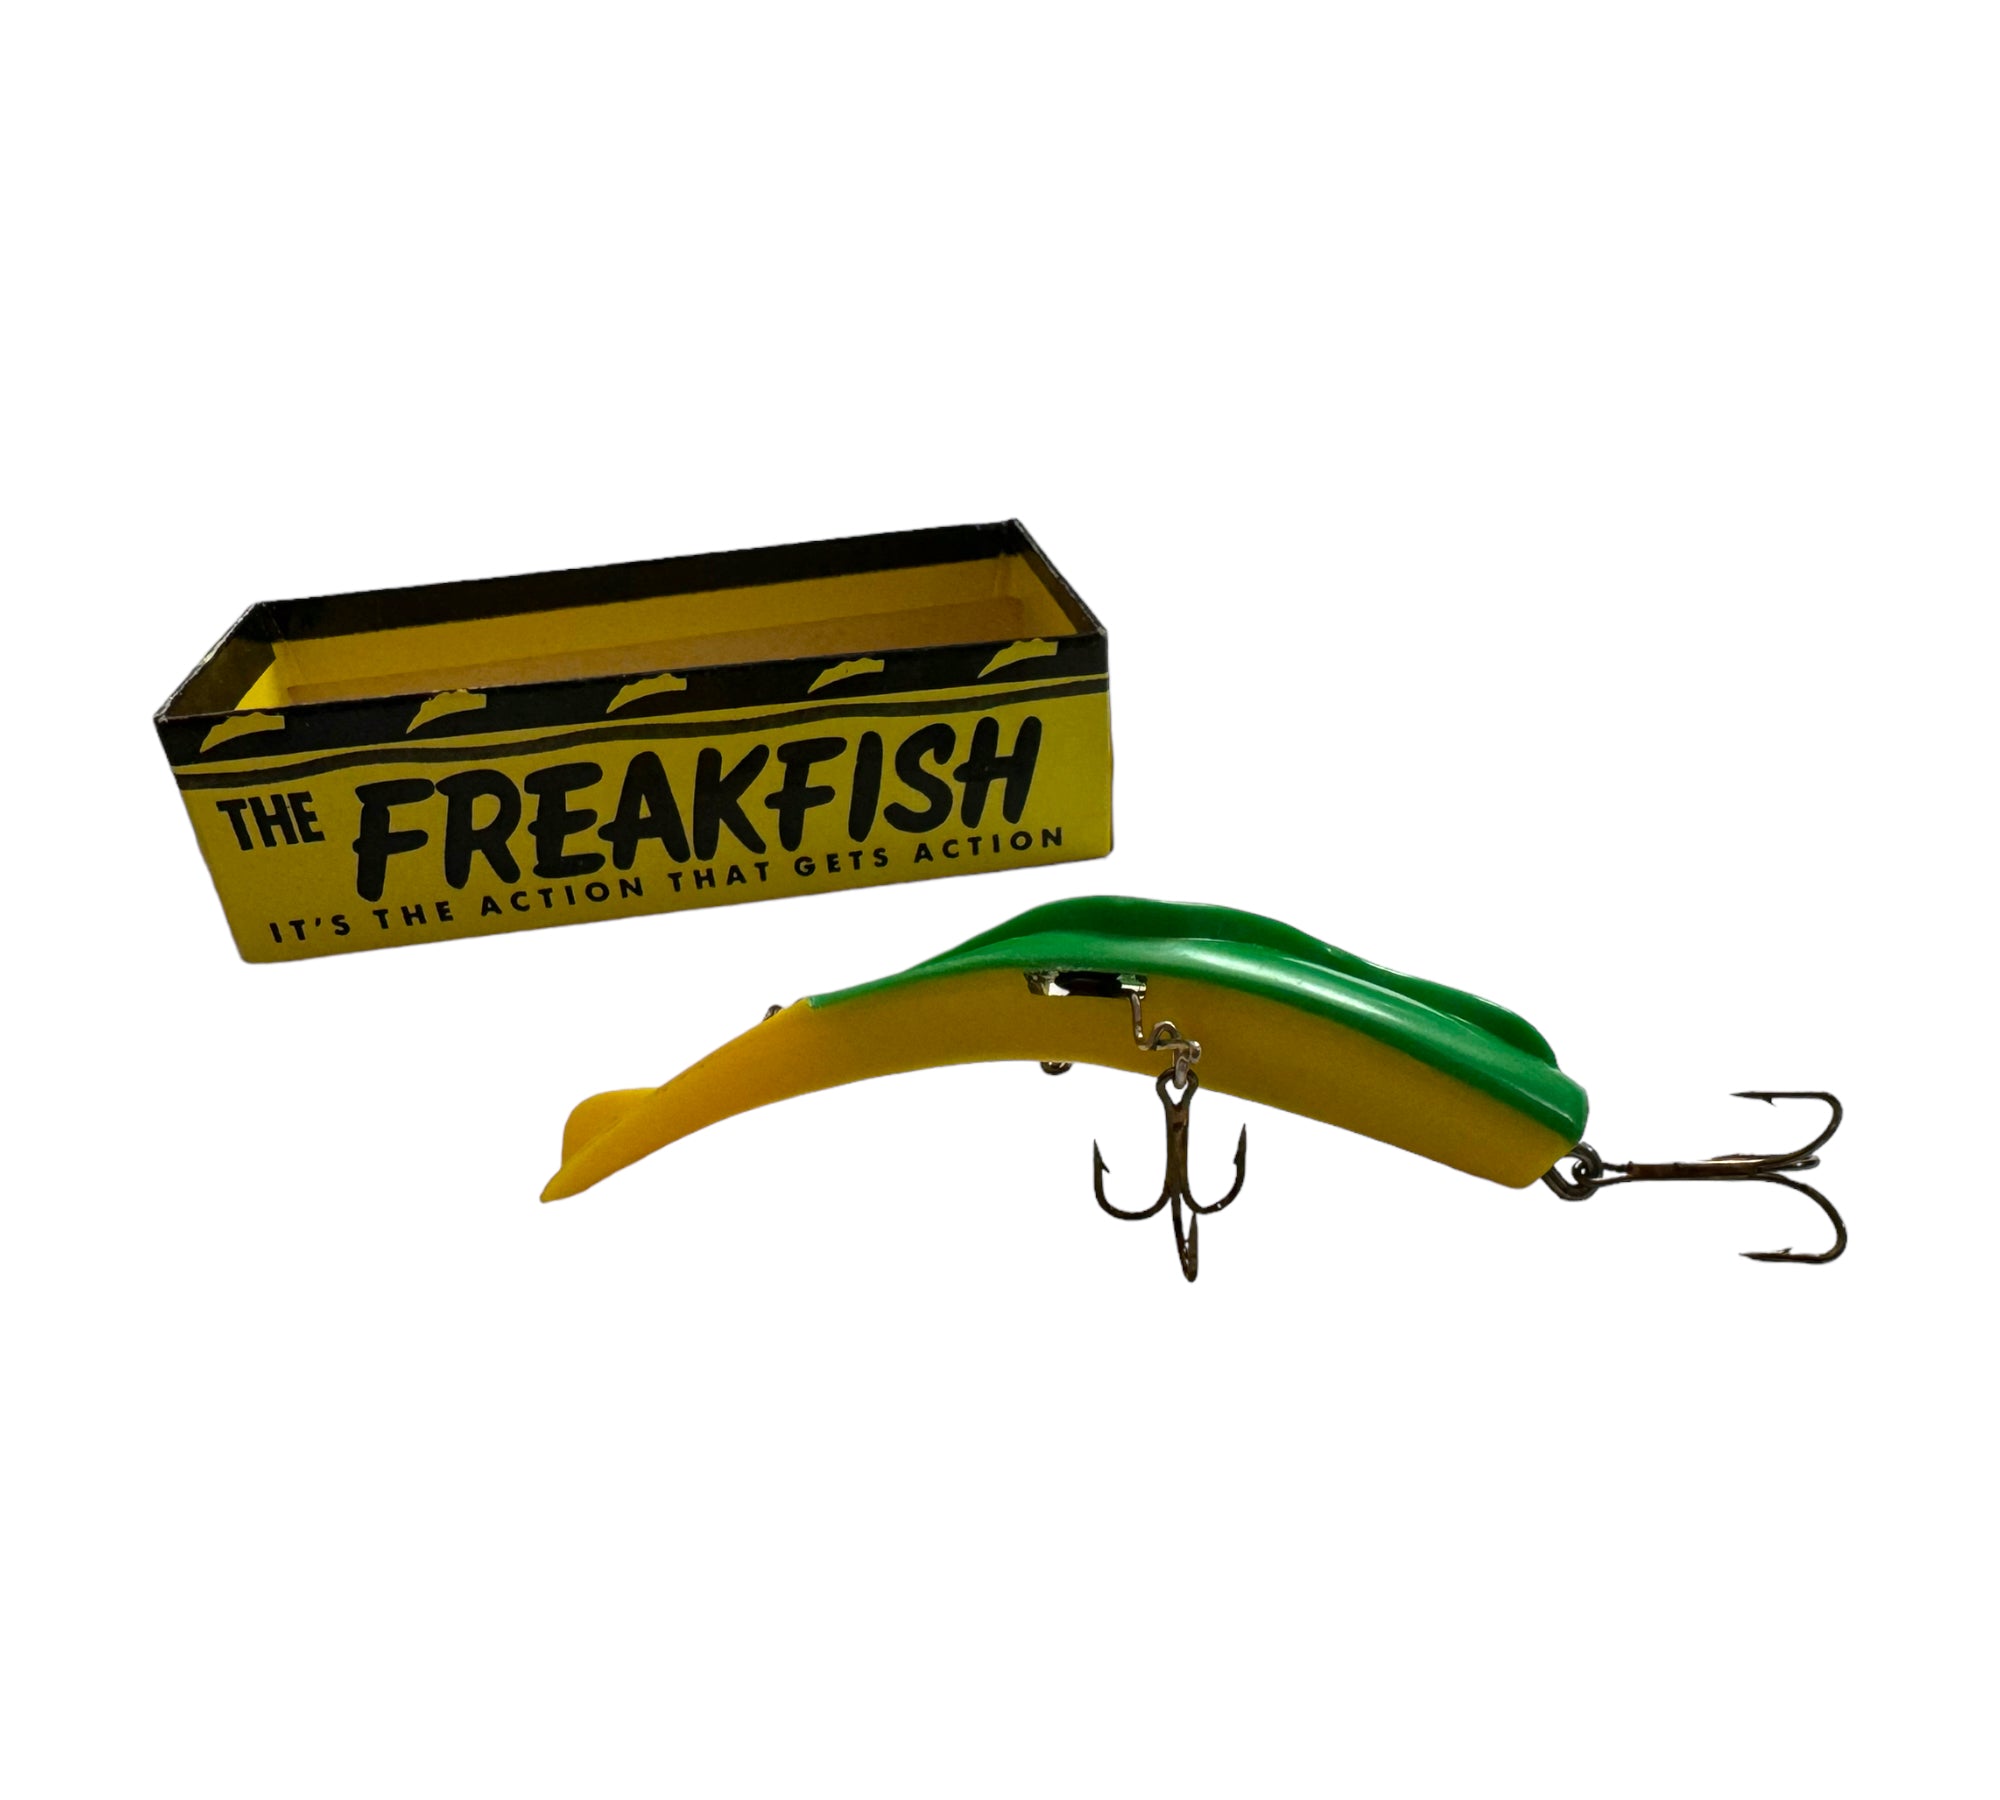 THE ELCO TACKLE COMPANY Y-5 FREAKFISH Vintage Fishing Lure – Toad